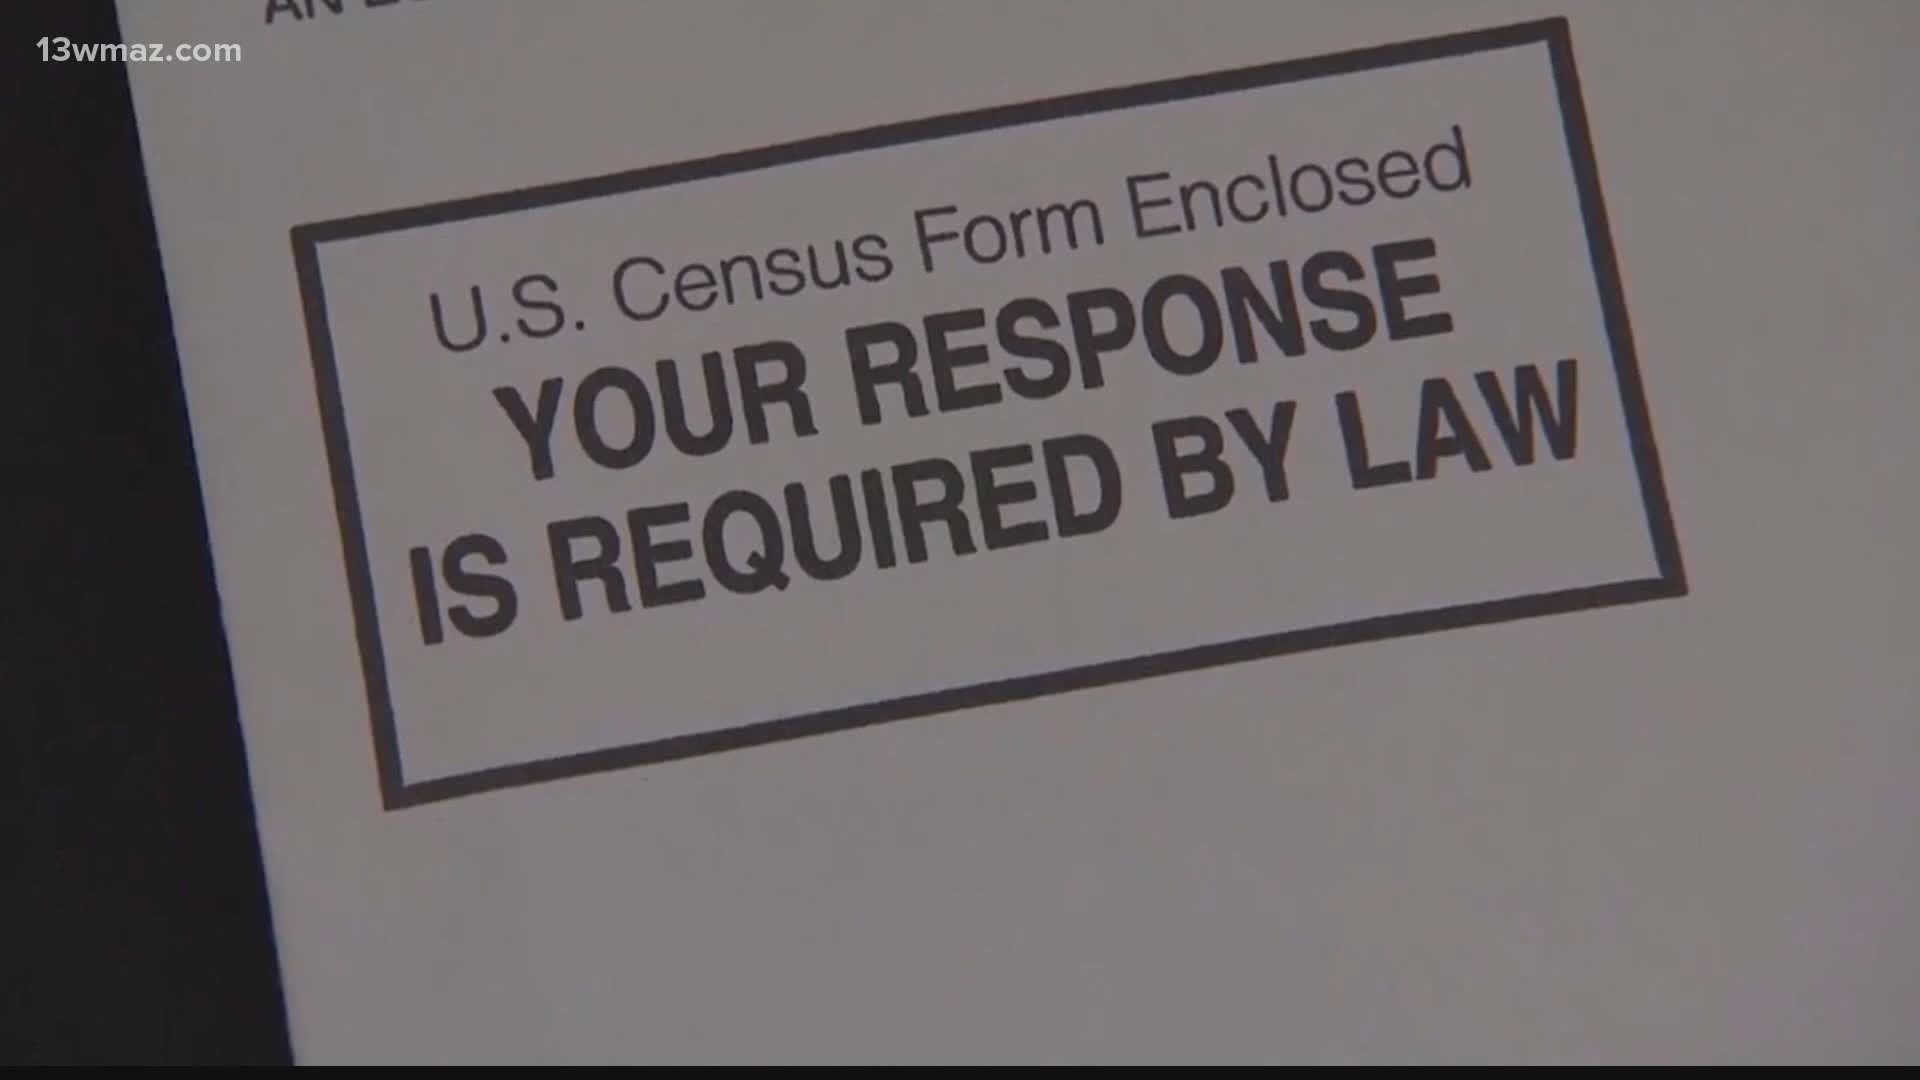 So far in Bibb County, just over 49 percent of households have filled out a census form.